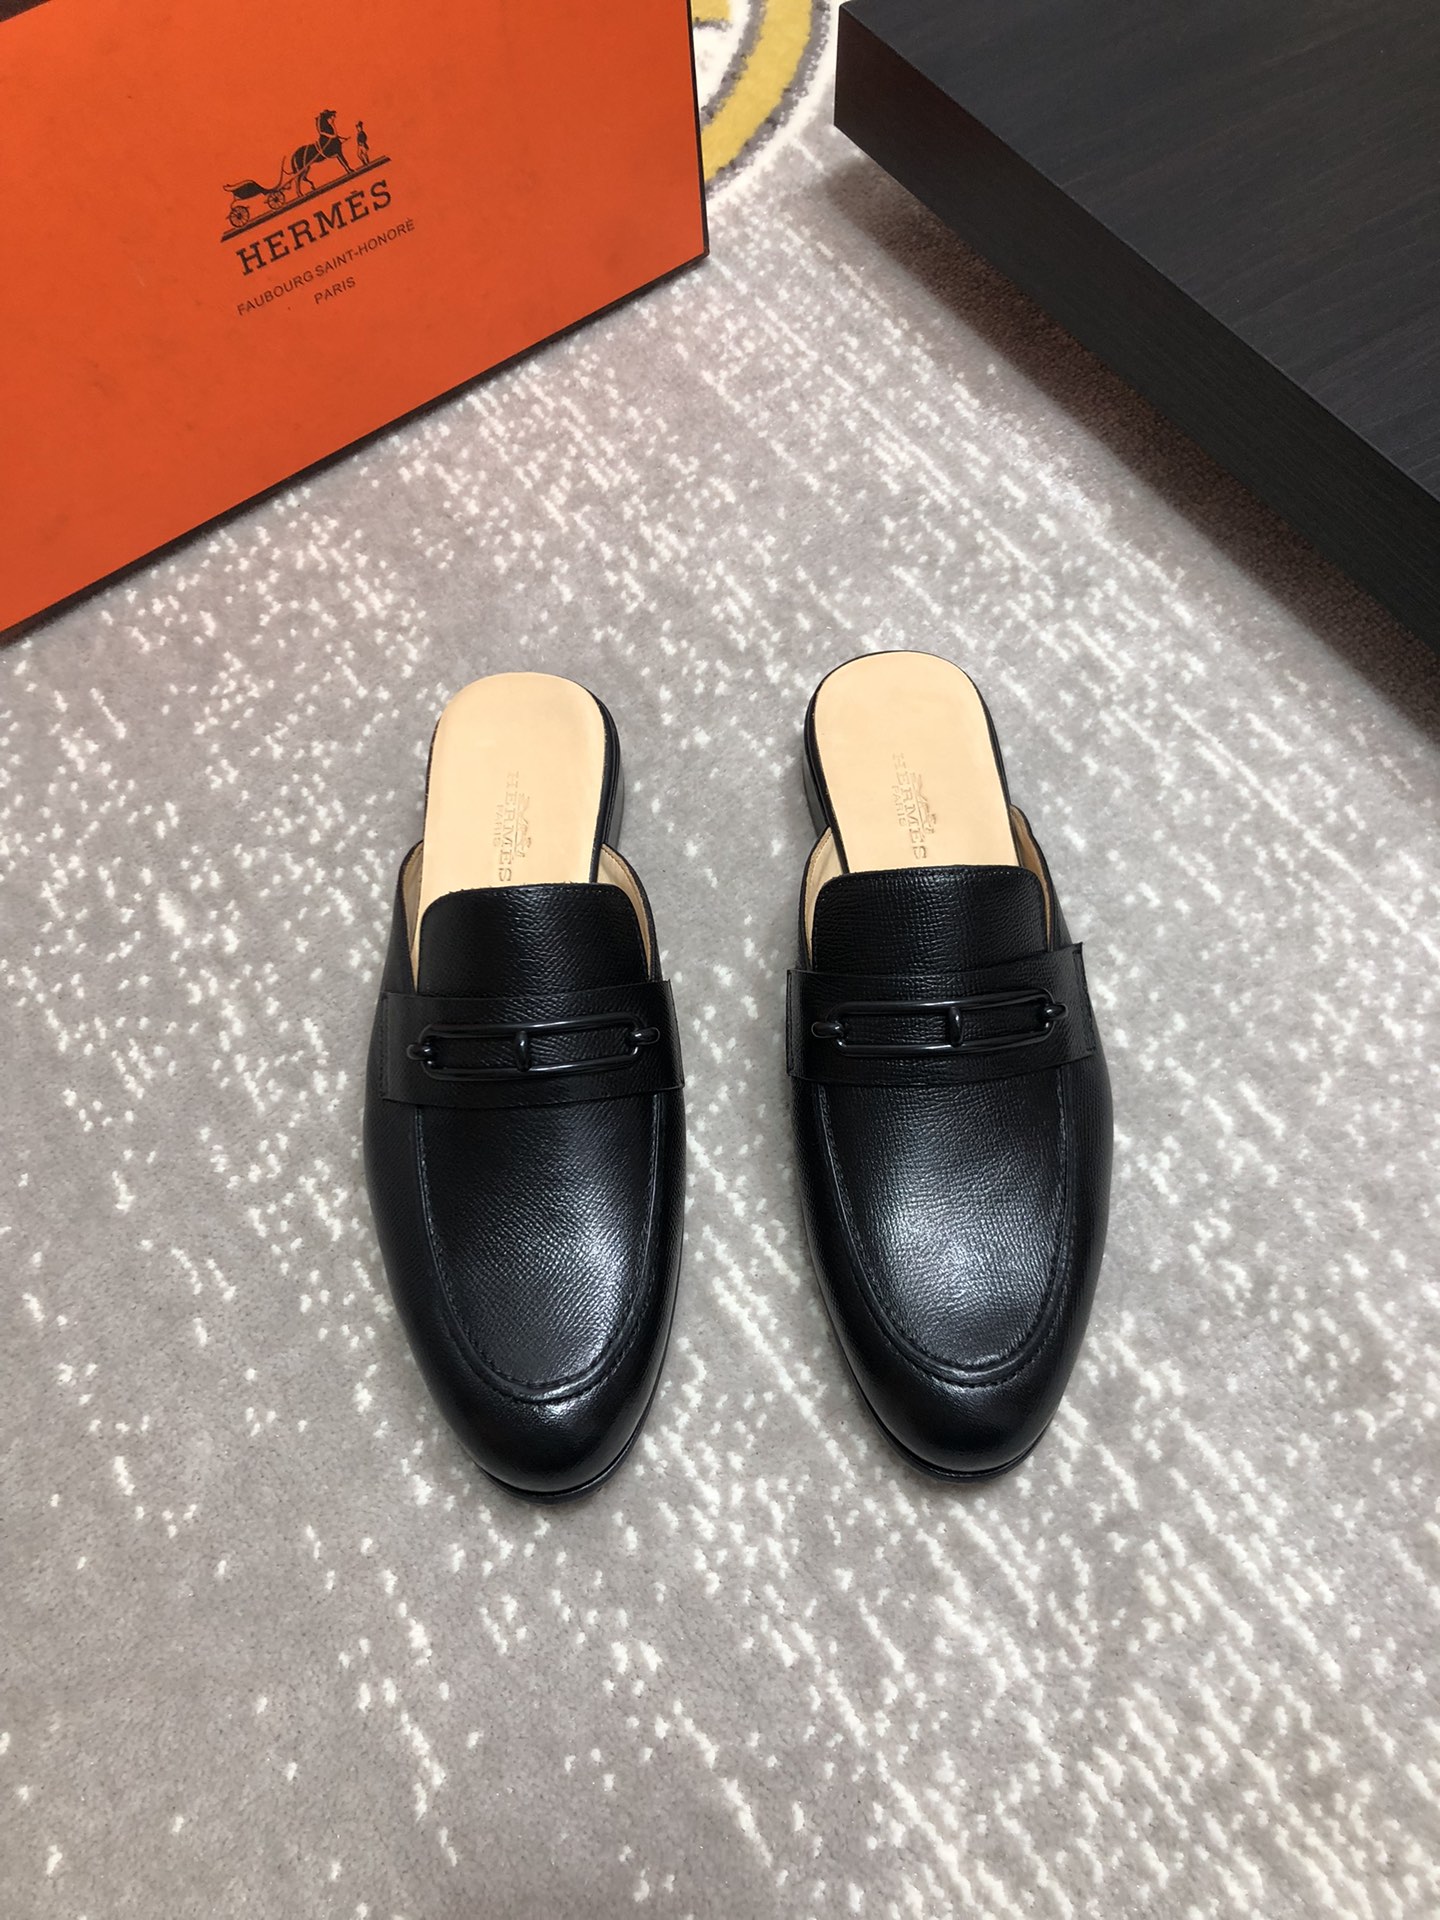 Hermes Shoes Slippers Best Designer Replica
 Cowhide Genuine Leather Casual